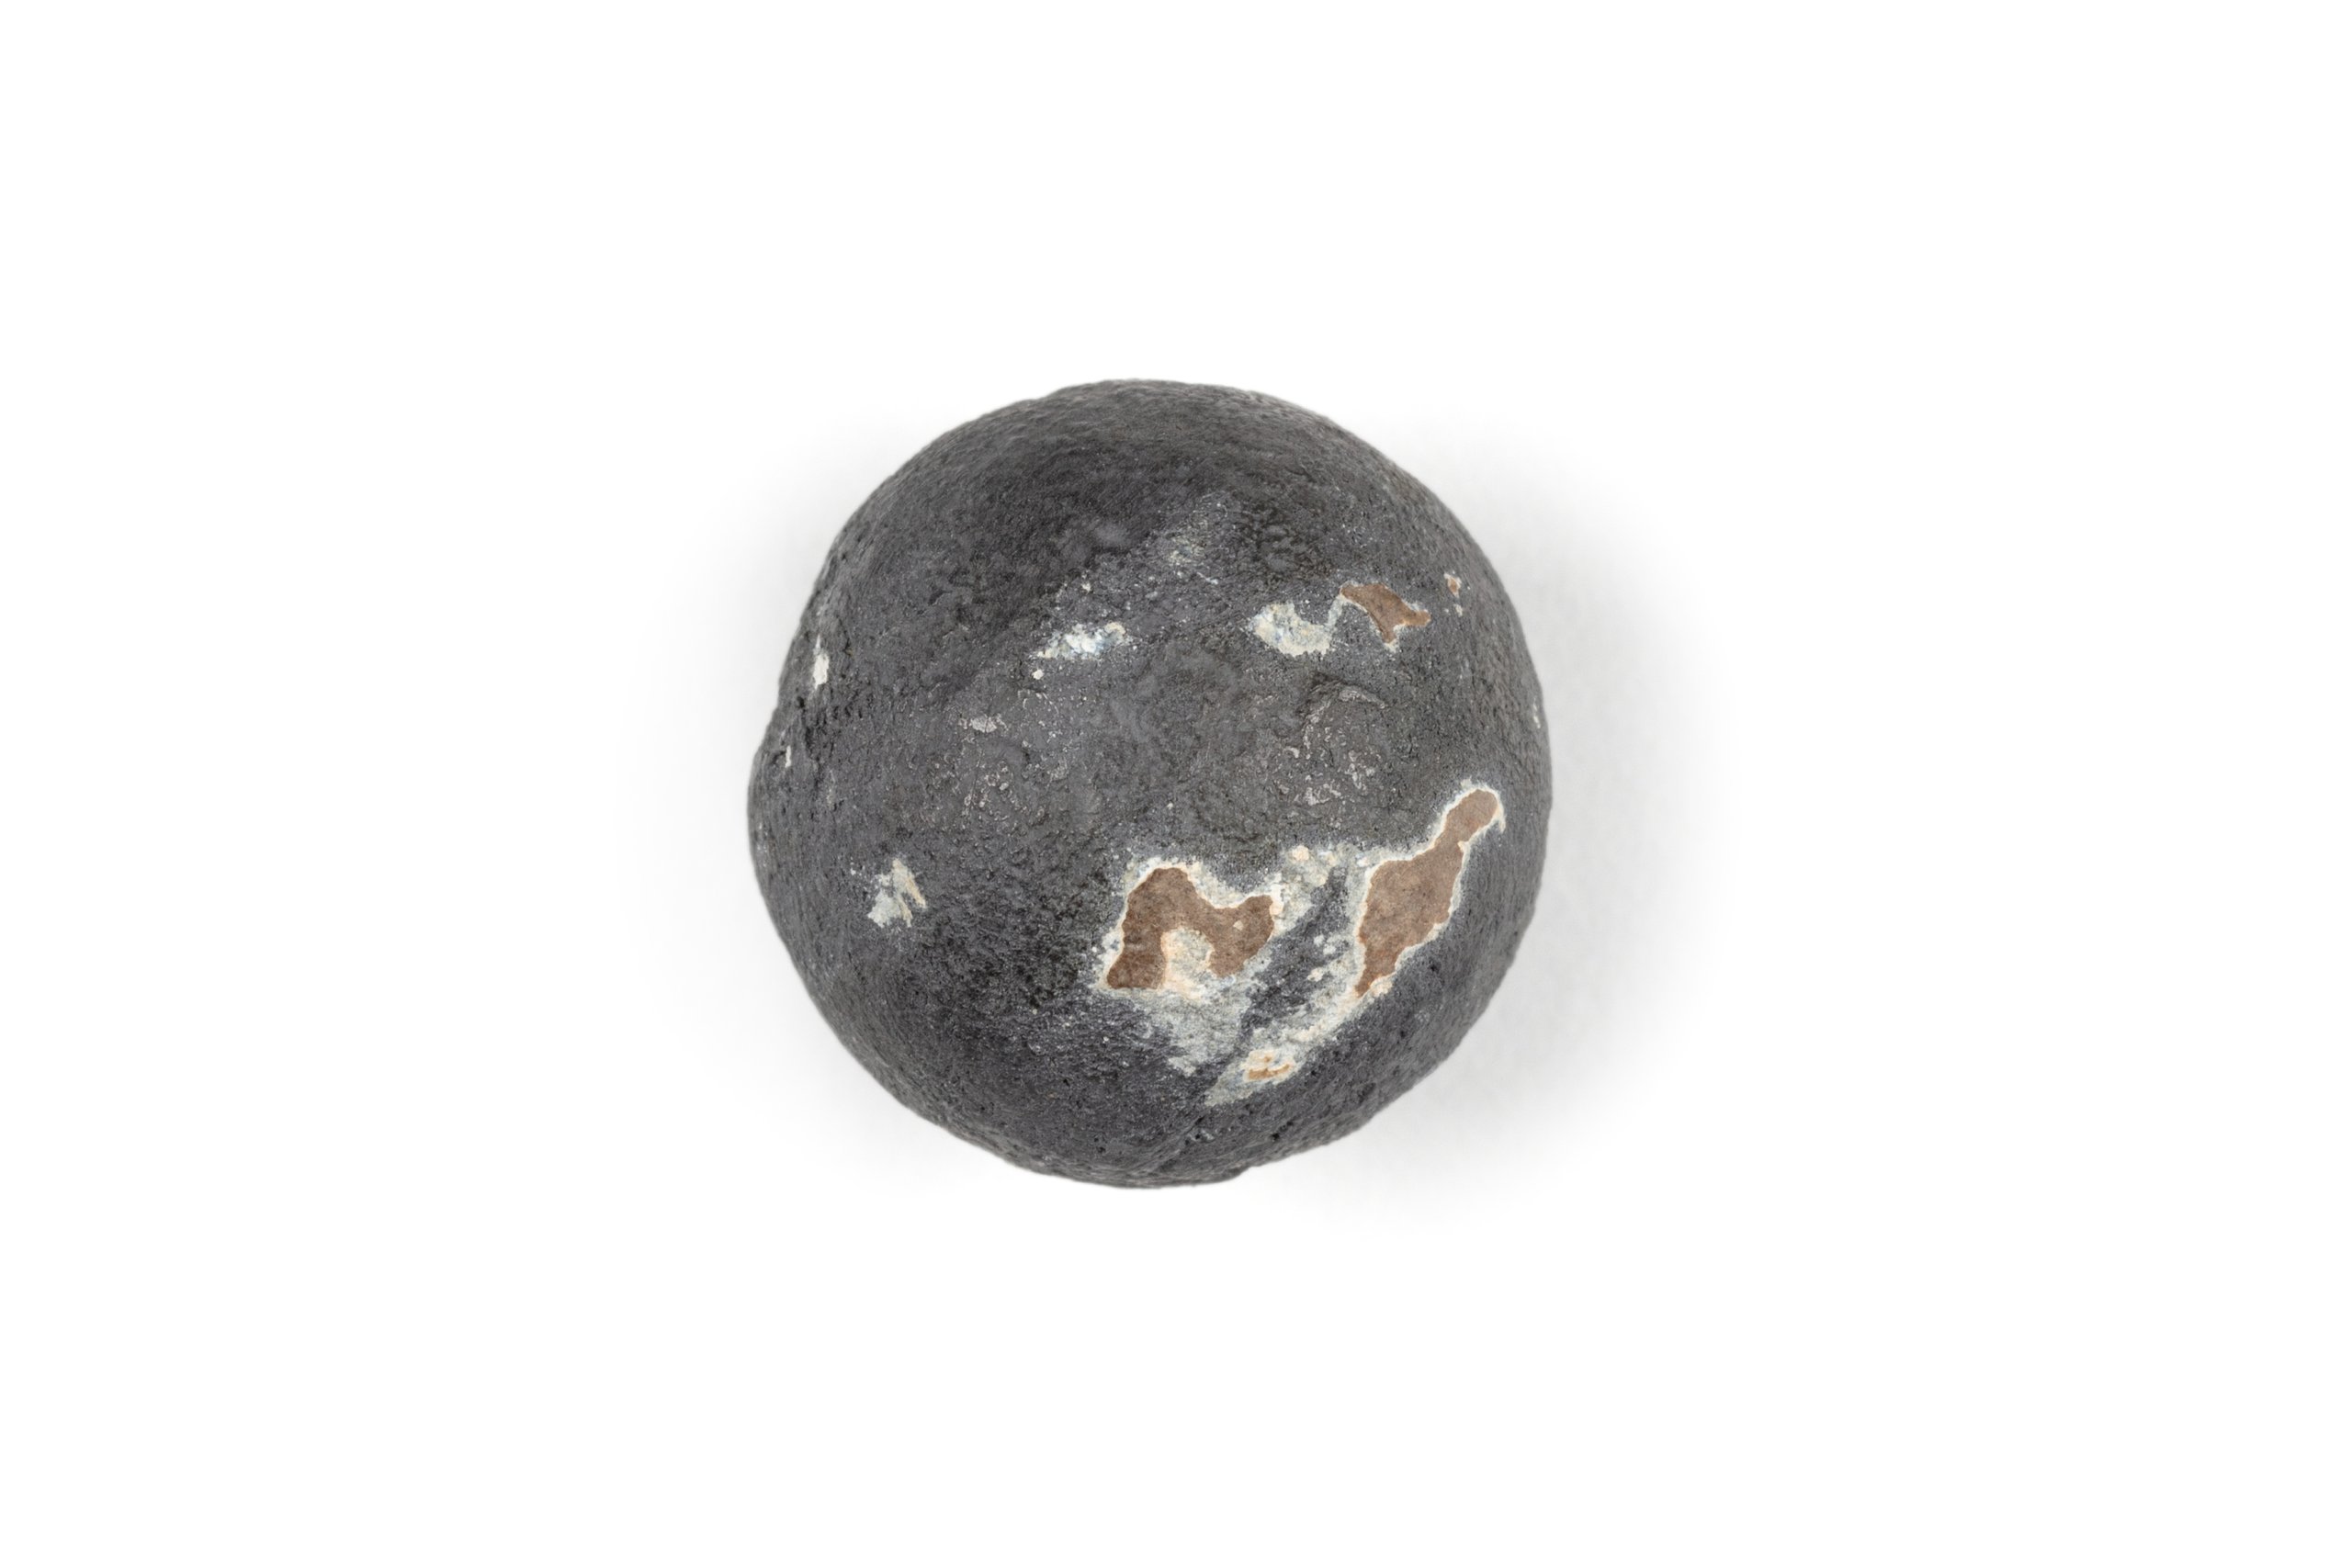 Spherical lead ball from a Potts & Hunt double barrelled carbine